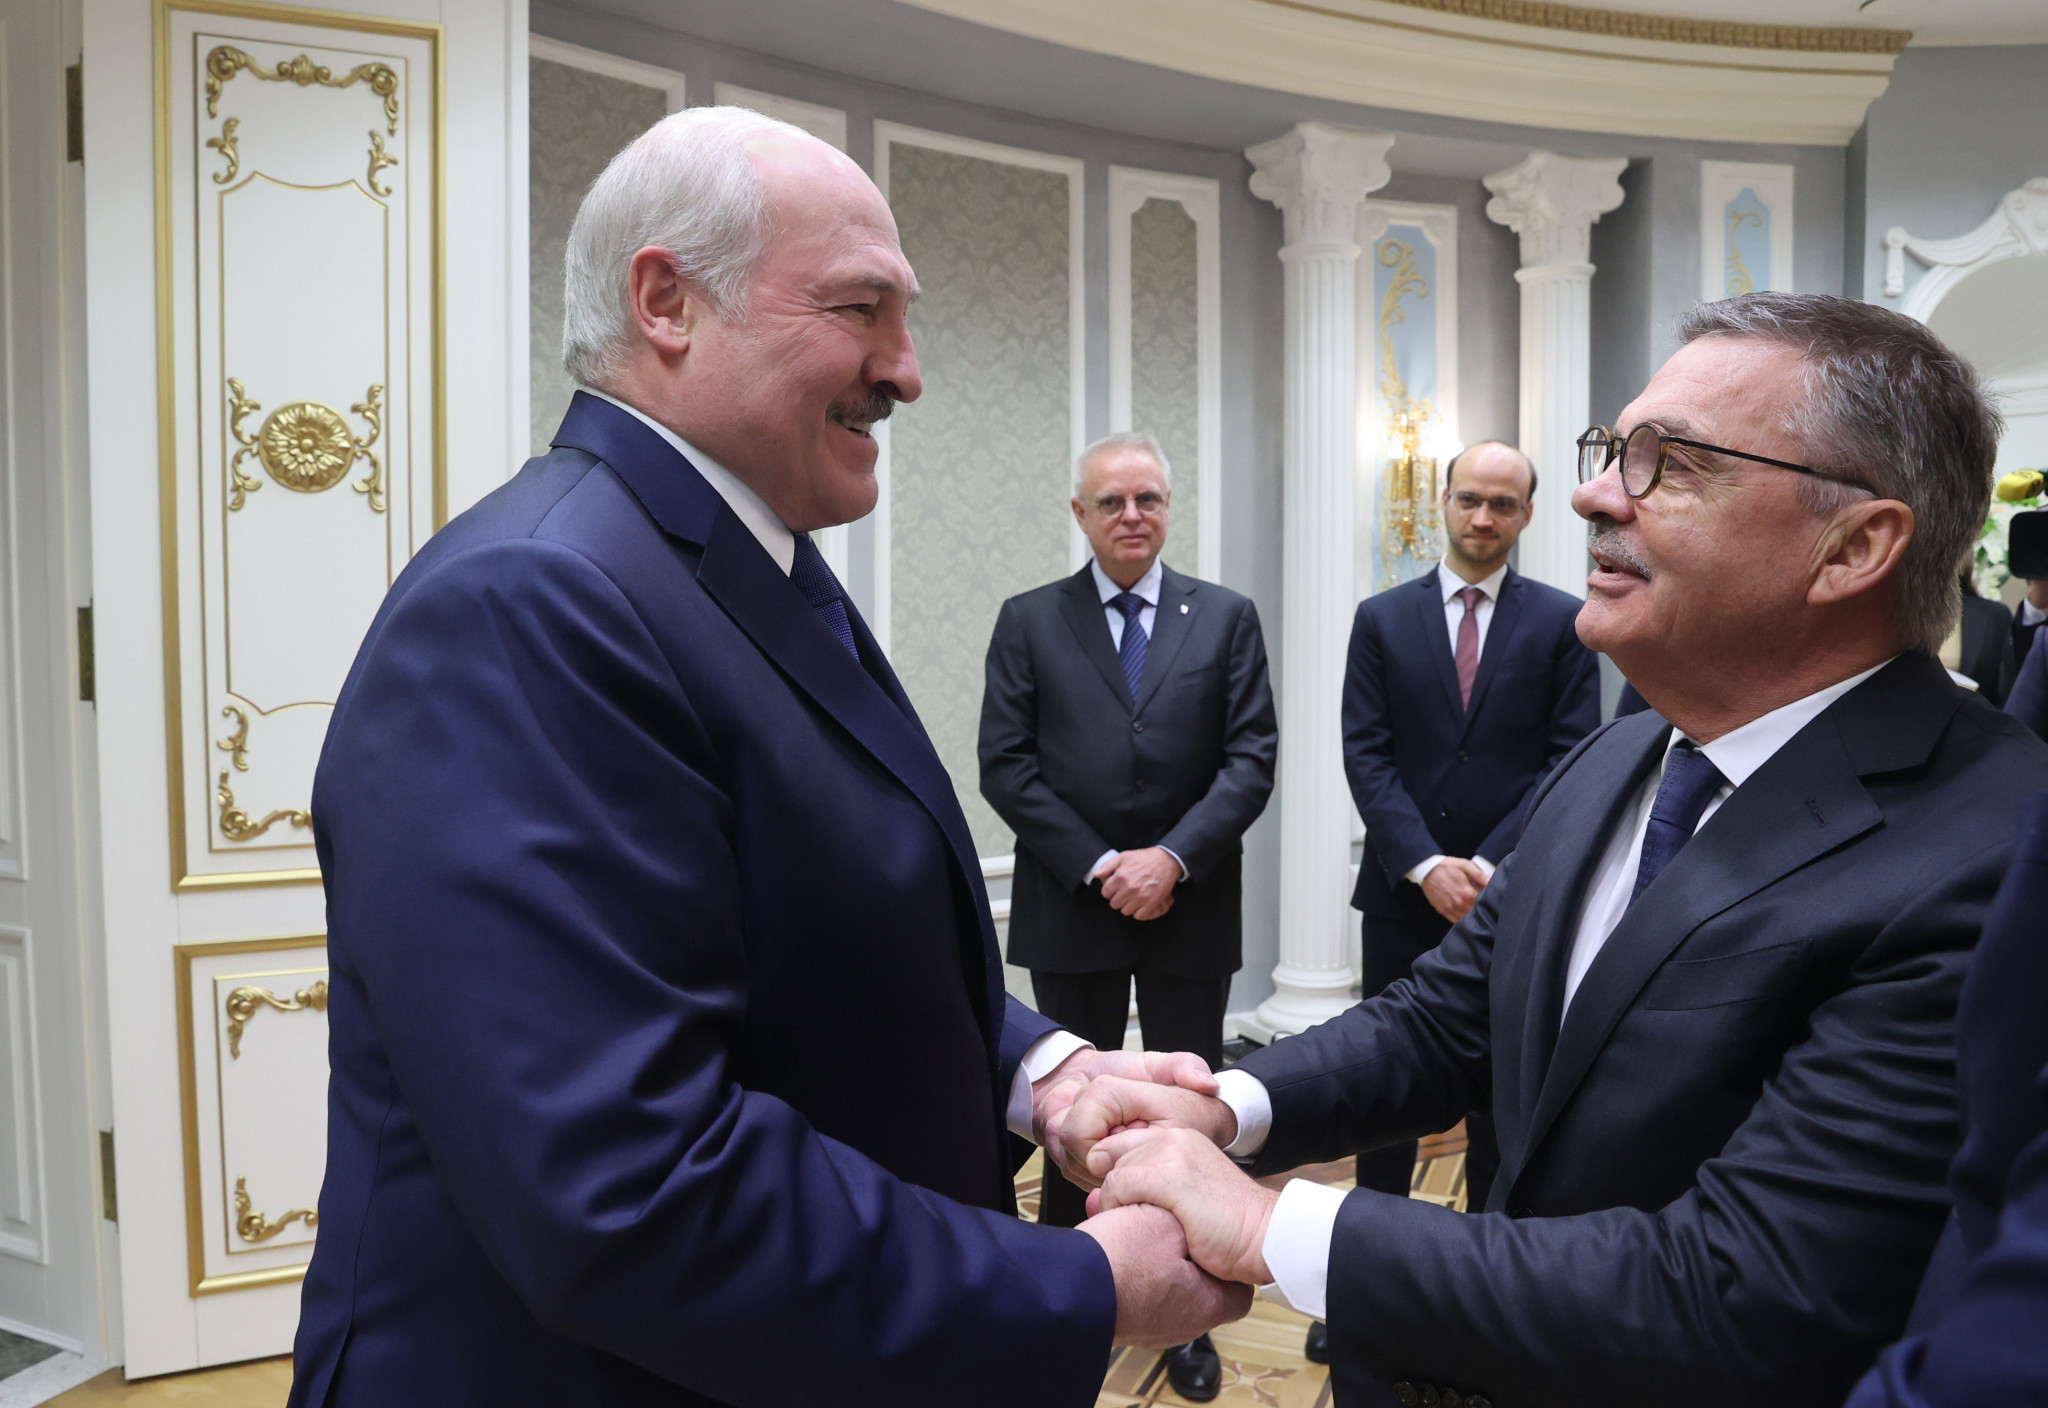 A recent meeting between Fasel (right) and Belarus President Alexander Lukashenko attracted criticism for its nature, although Fasel insisted it was held 